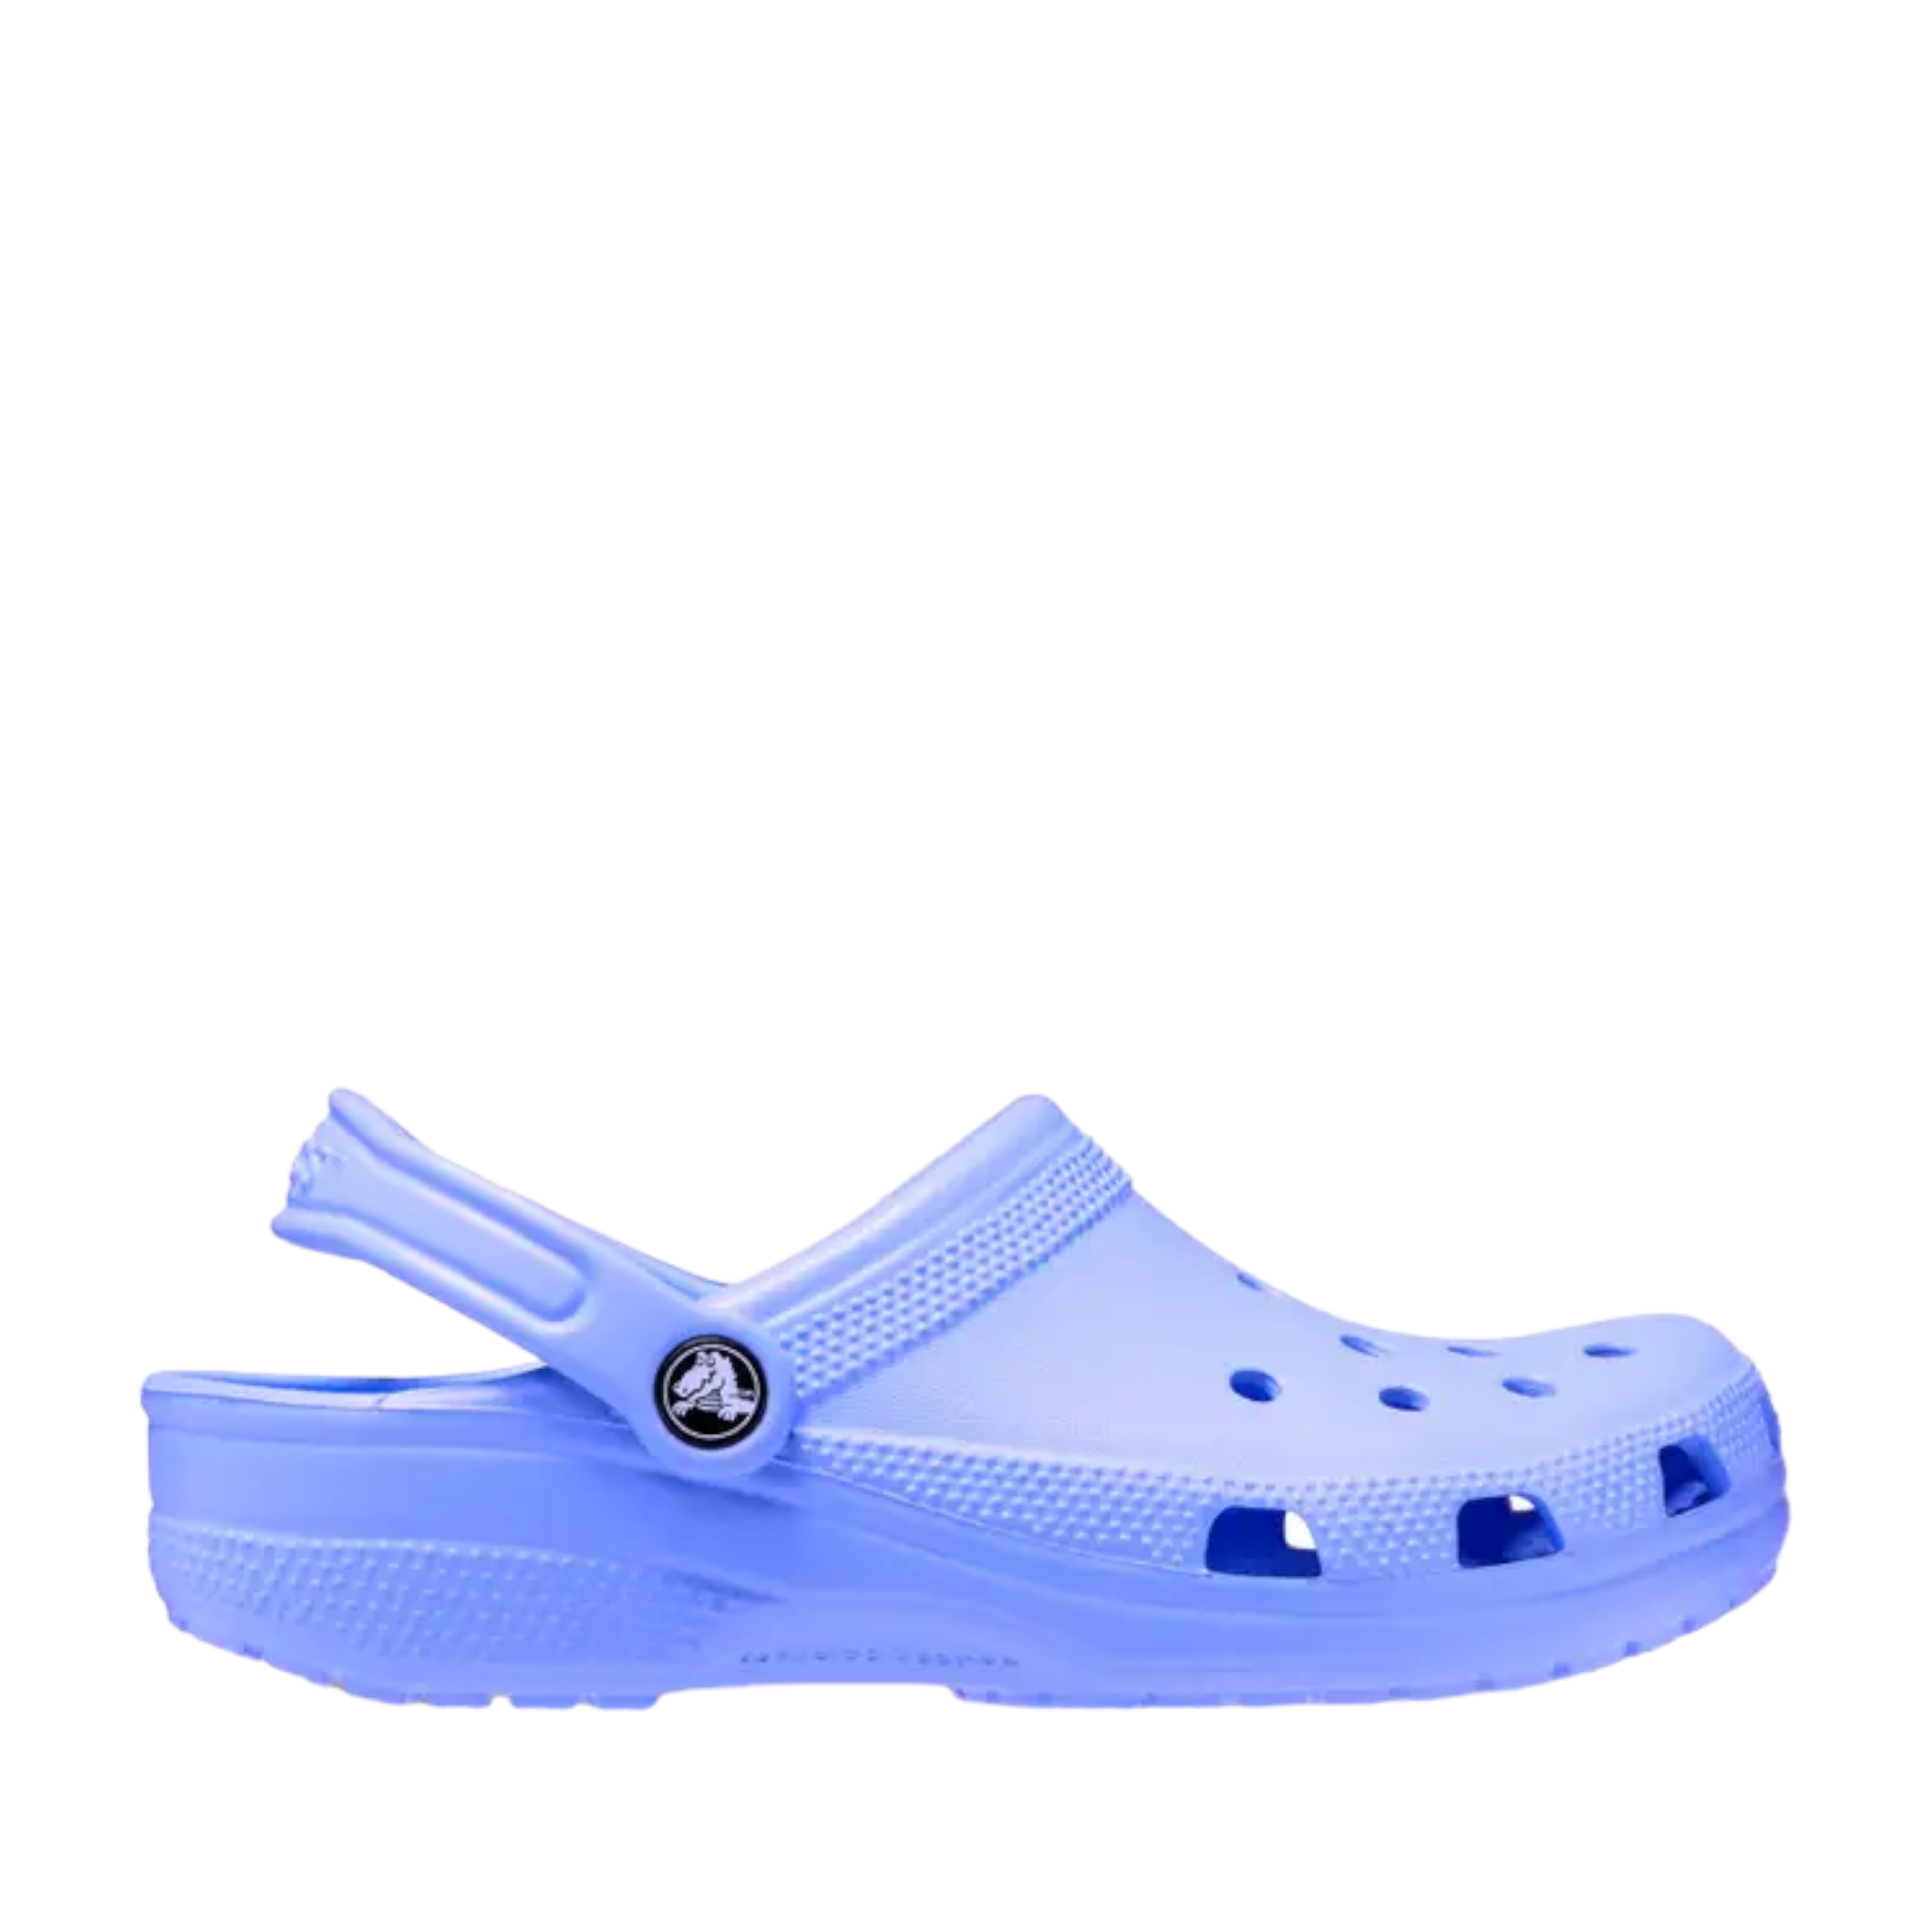 Crocs Classic Clogs online and instore with shoe&me Mount Maunganui. Shop Moon Jelly Clogs